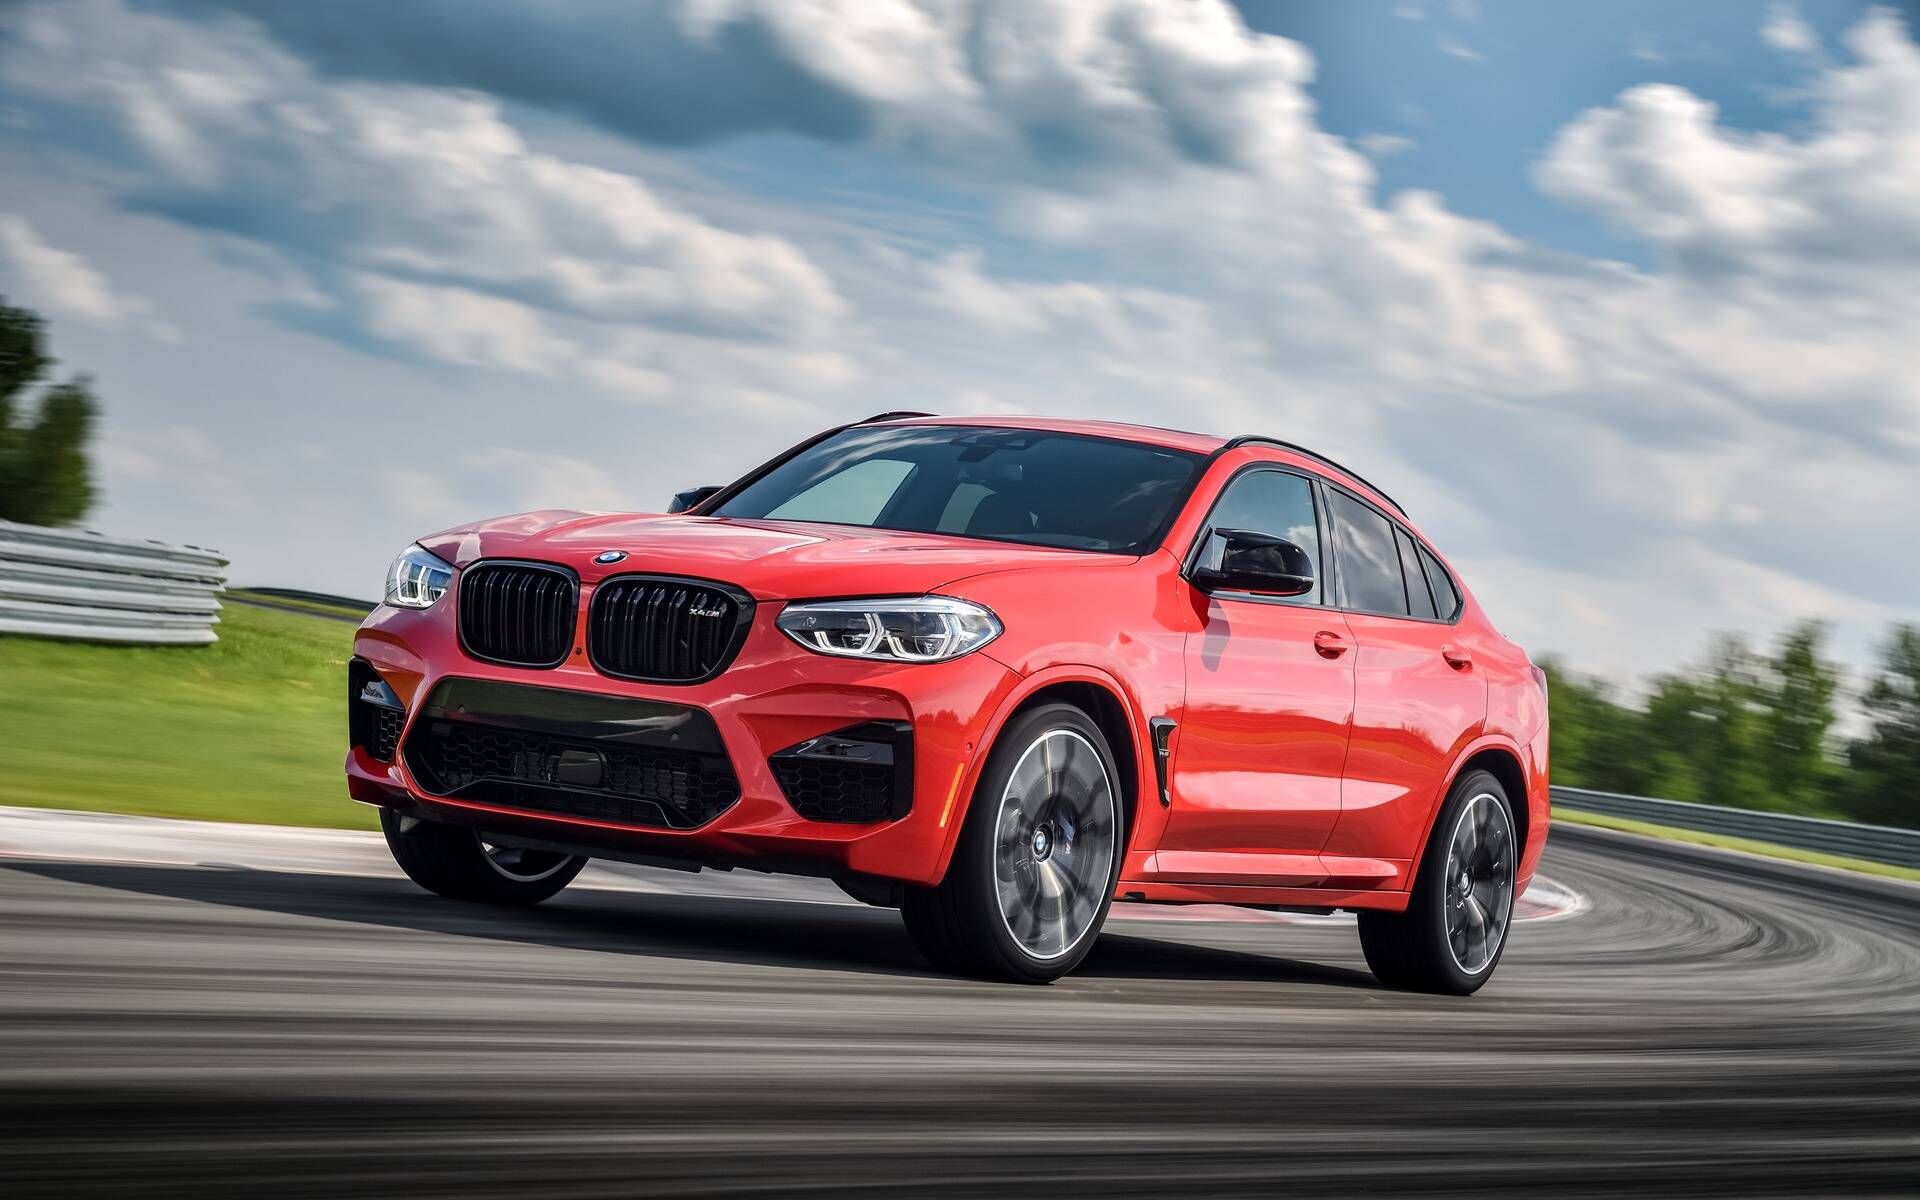 2021 BMW X4 - News, reviews, picture galleries and videos - The Car Guide